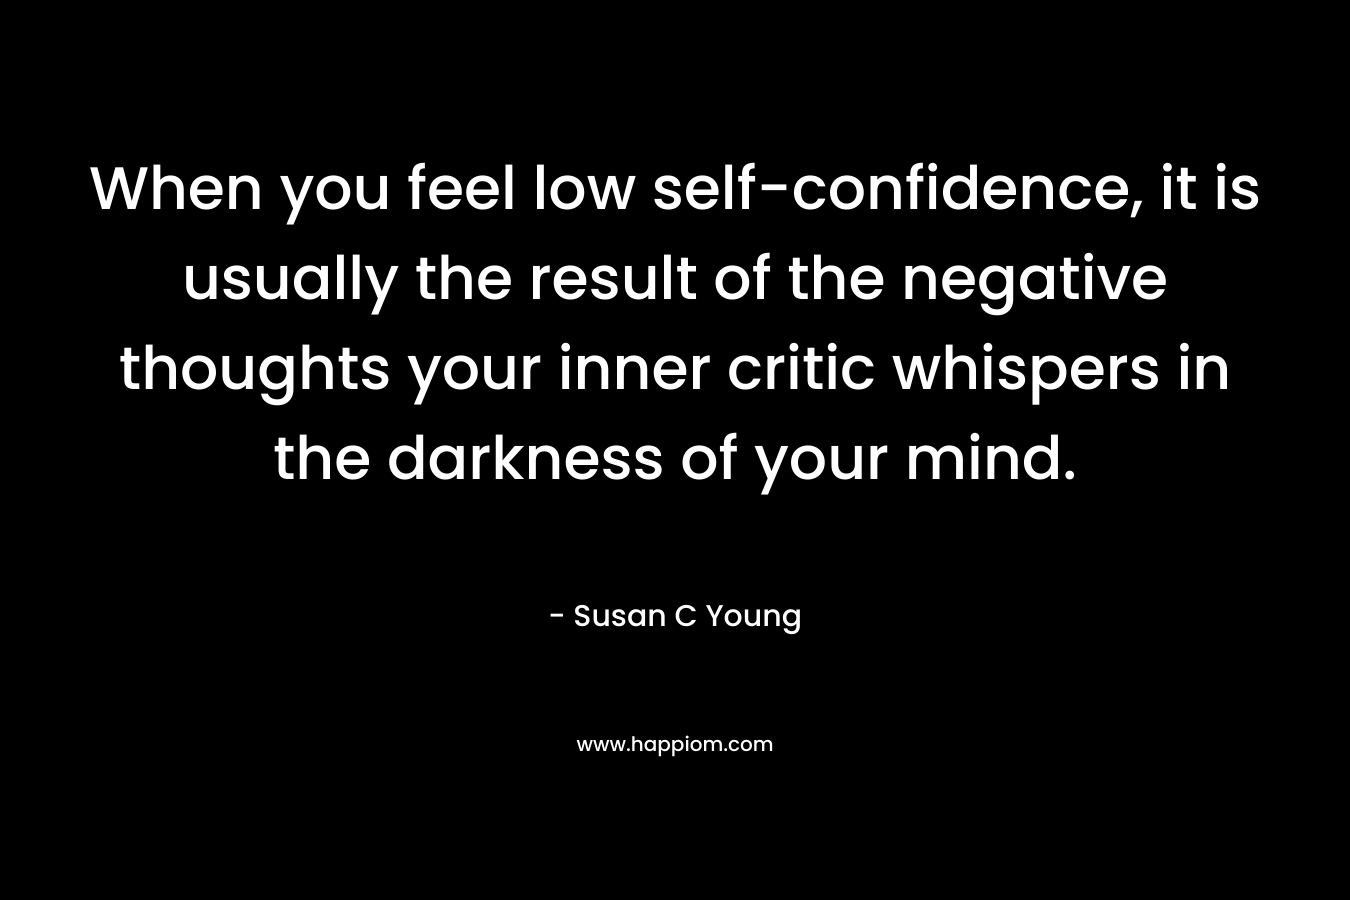 When you feel low self-confidence, it is usually the result of the negative thoughts your inner critic whispers in the darkness of your mind.